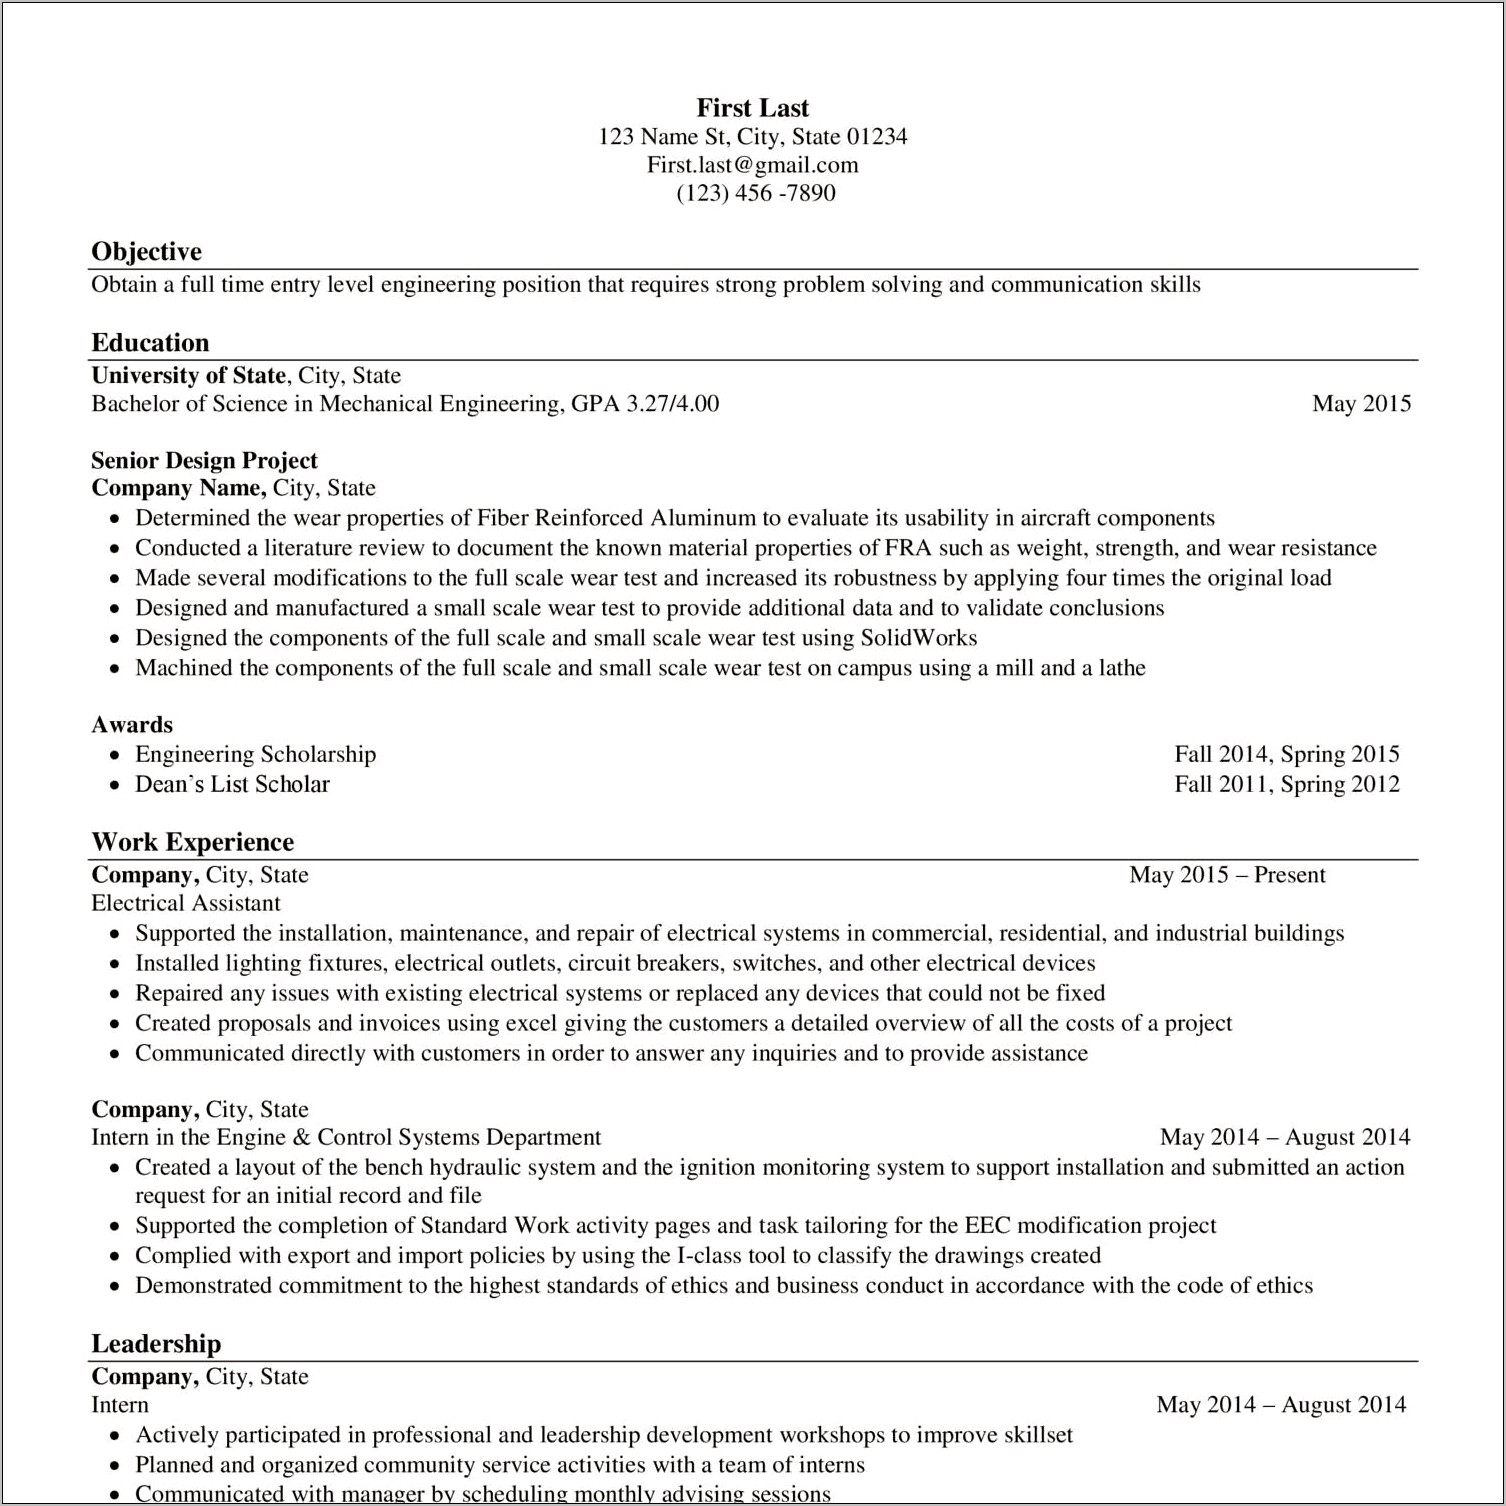 Fake Resume Example To Medical School